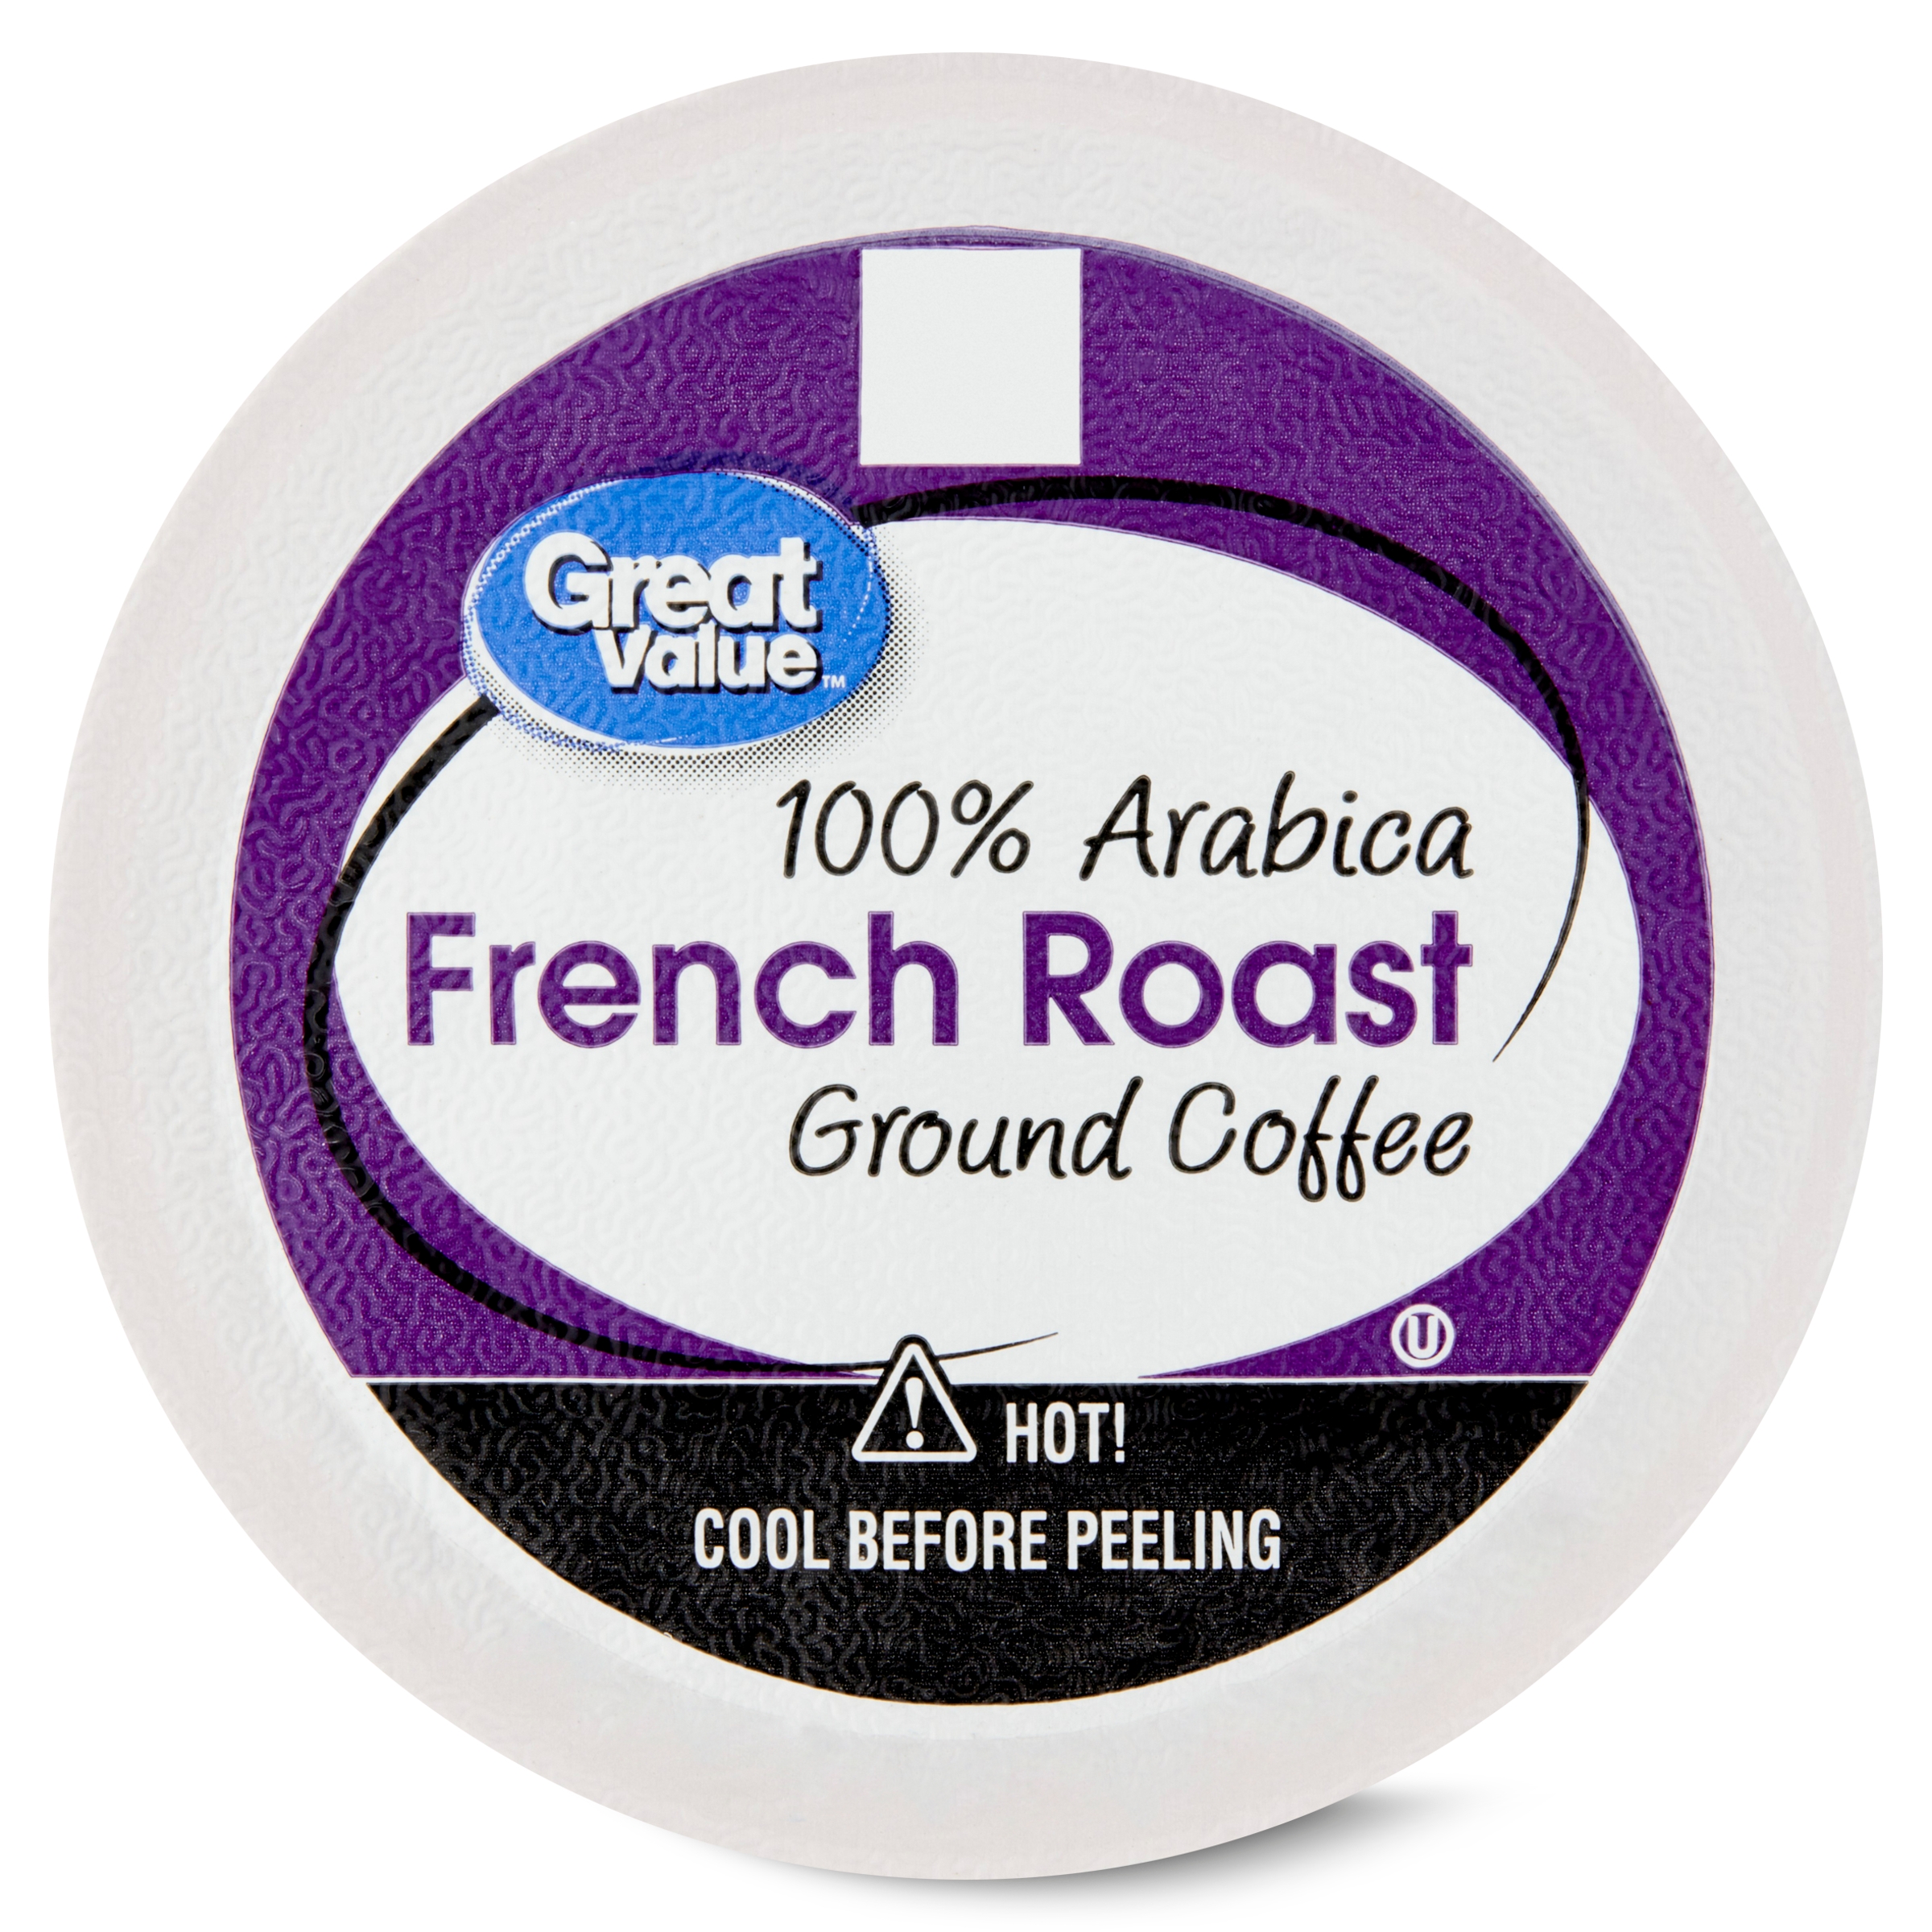 Great Value 100% Arabica French Dark Roast Ground Coffee Pods, 12 Ct - image 3 of 9